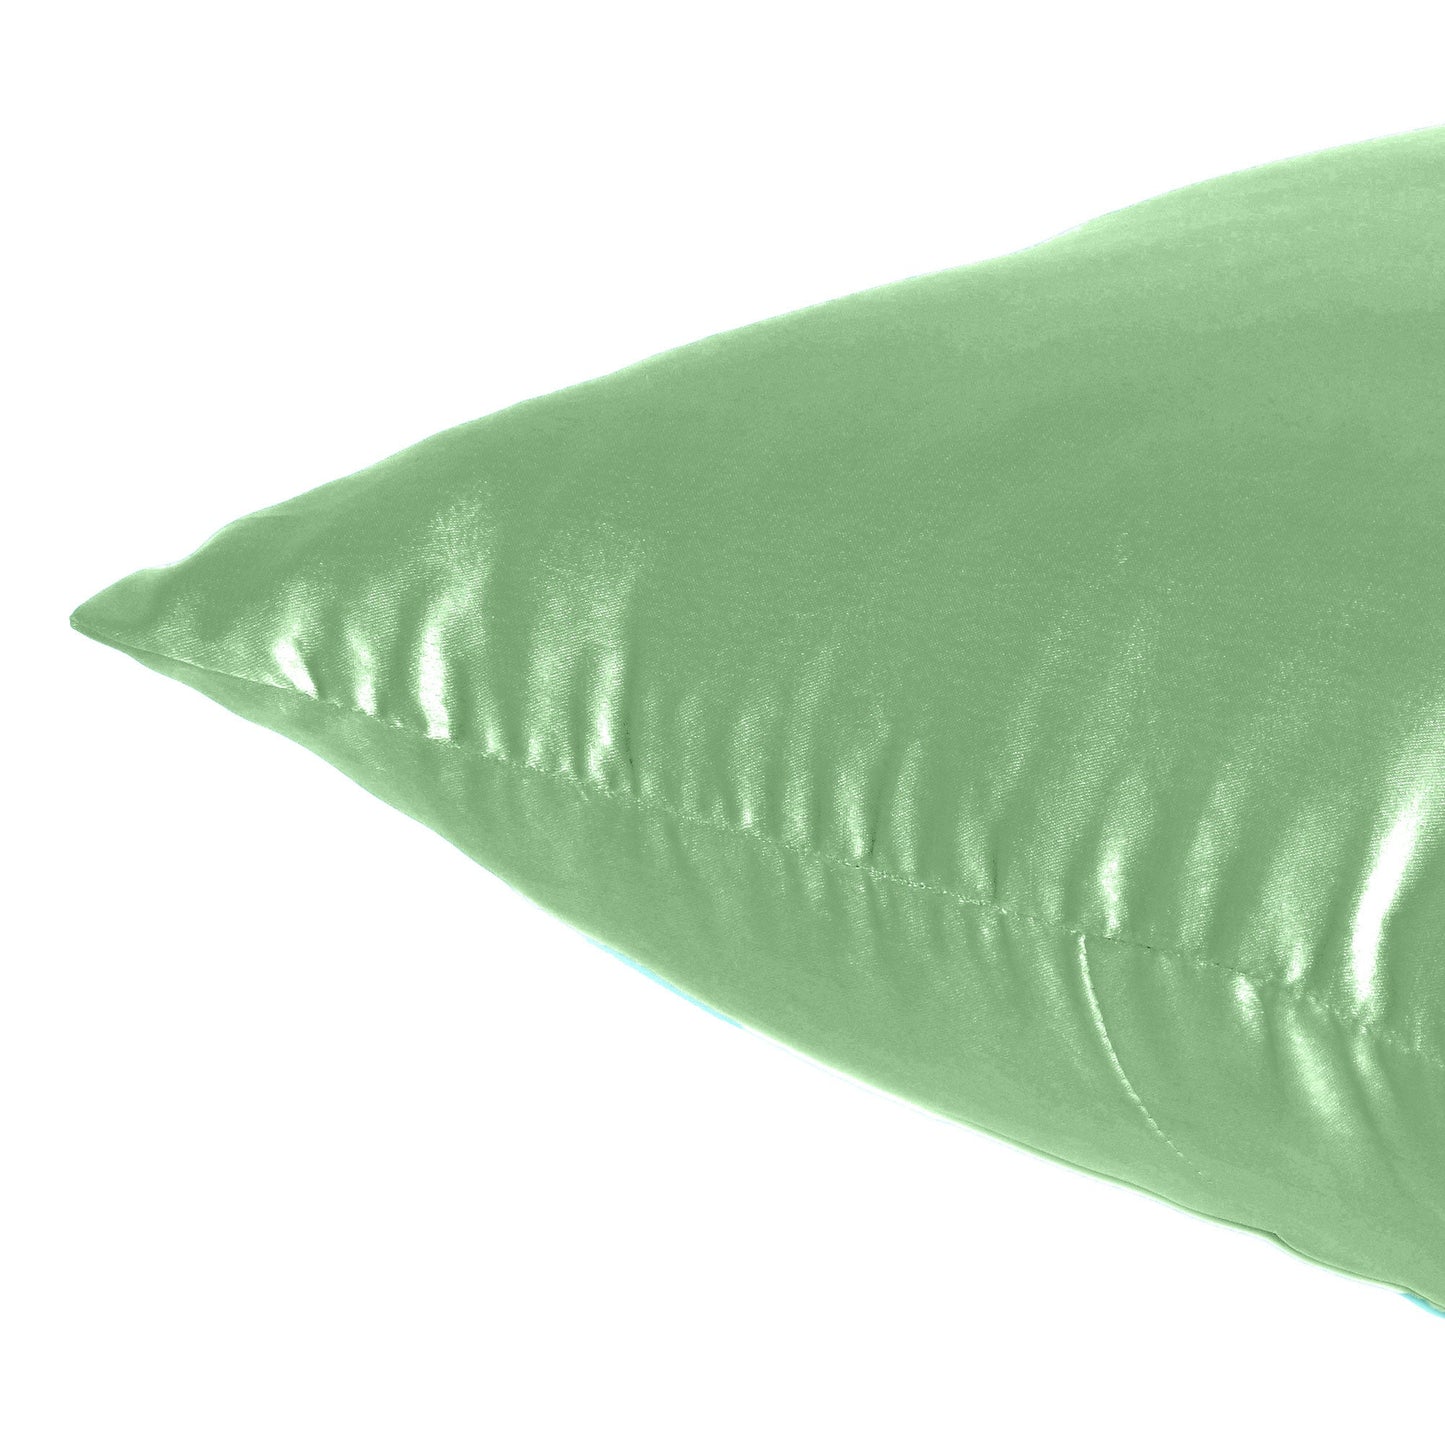 Ambrosia Green Satin Silky Cushion Covers in Set of 2